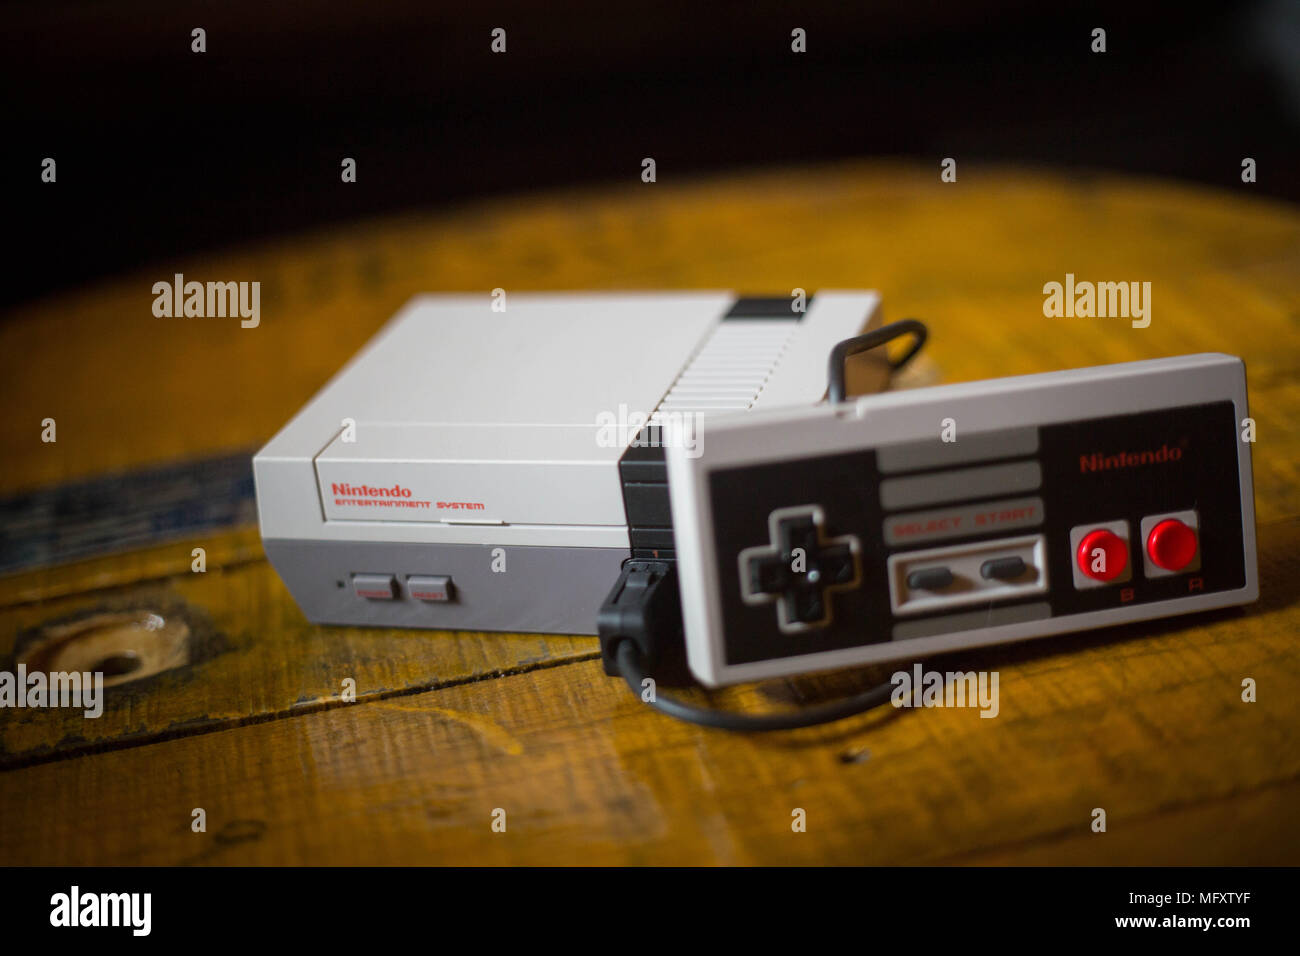 A Nintendo Classic Mini 'Nintendo Entertainment System' video game console with a controller plugged on it. The Kyoto based video game company Nintendo ended it’s comeback year revenue with worth $9 Billion after a glorious year 2017 notably with the launch of the hybrid console the Nintendo Switch, mini retro vintage game consoles such as the Nintendo Entertainment System and Super Nintendo as well as its mobile phone video games. Stock Photo